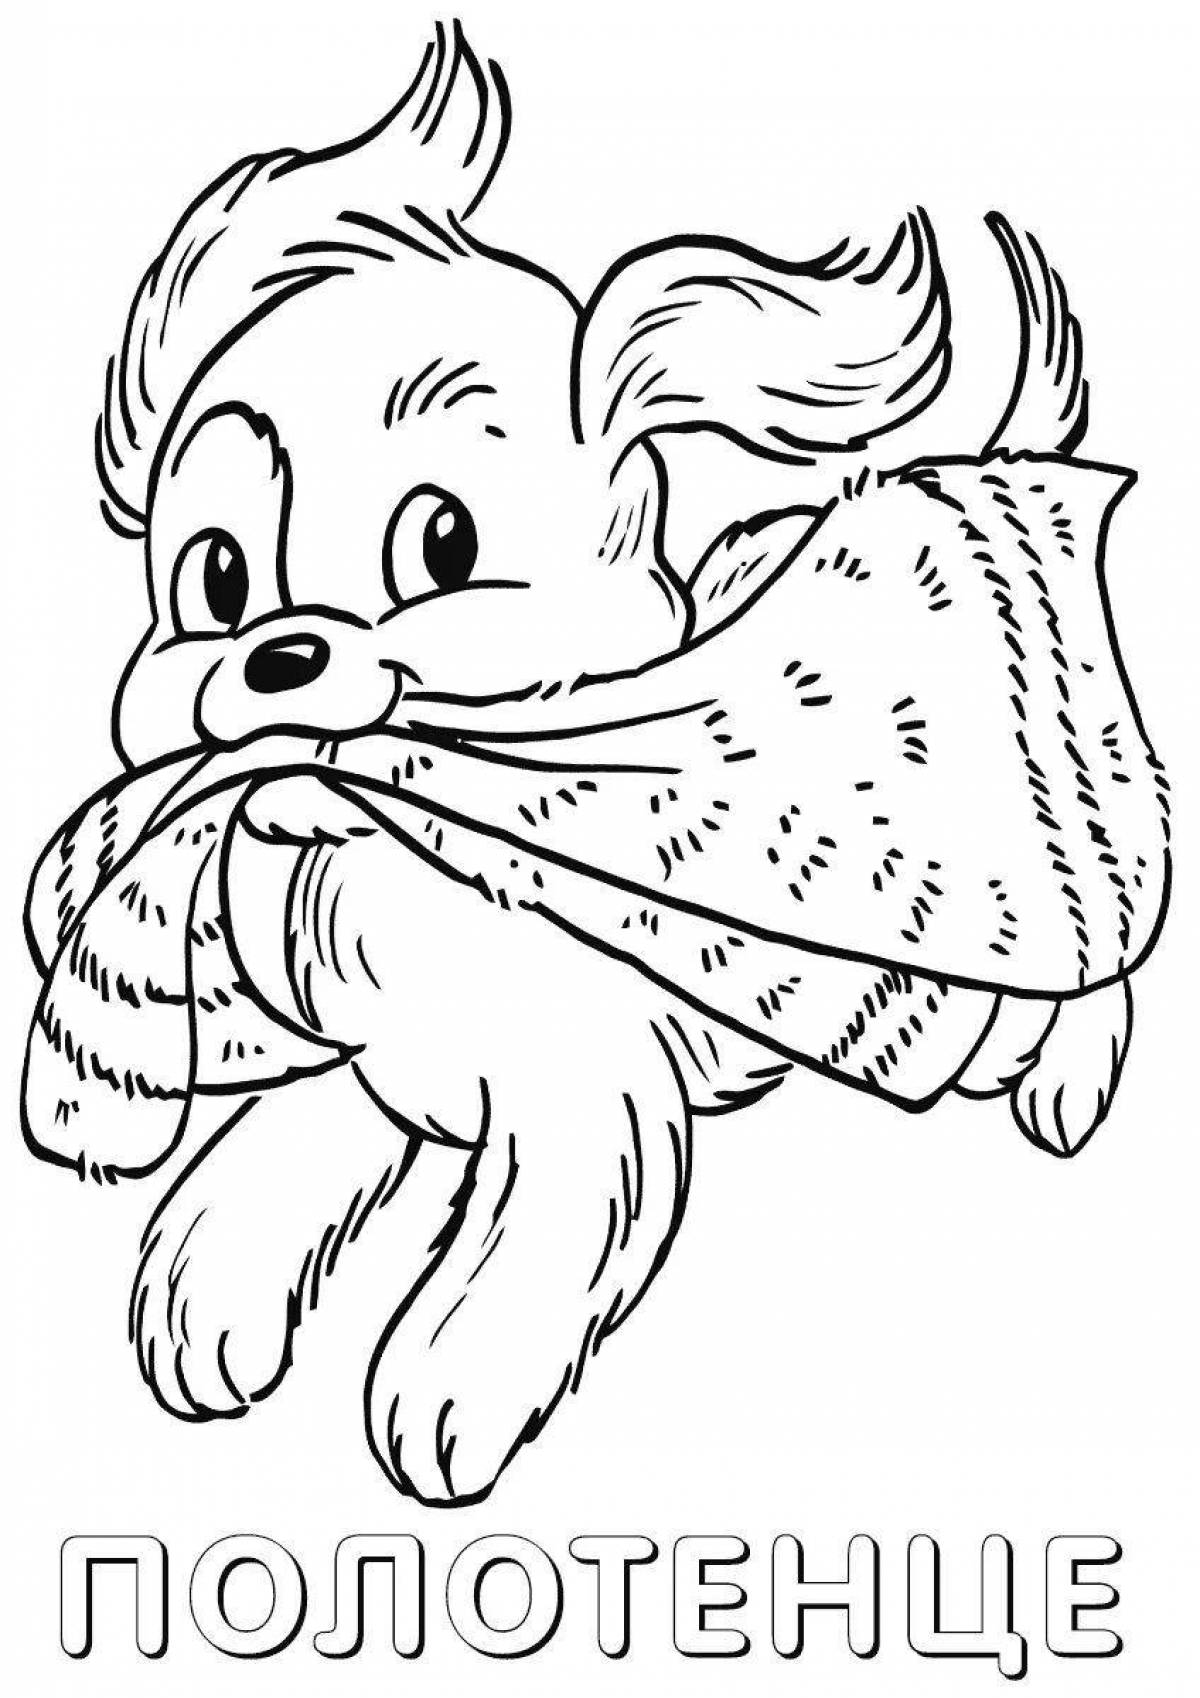 Vibrant coloring page of towels for kids